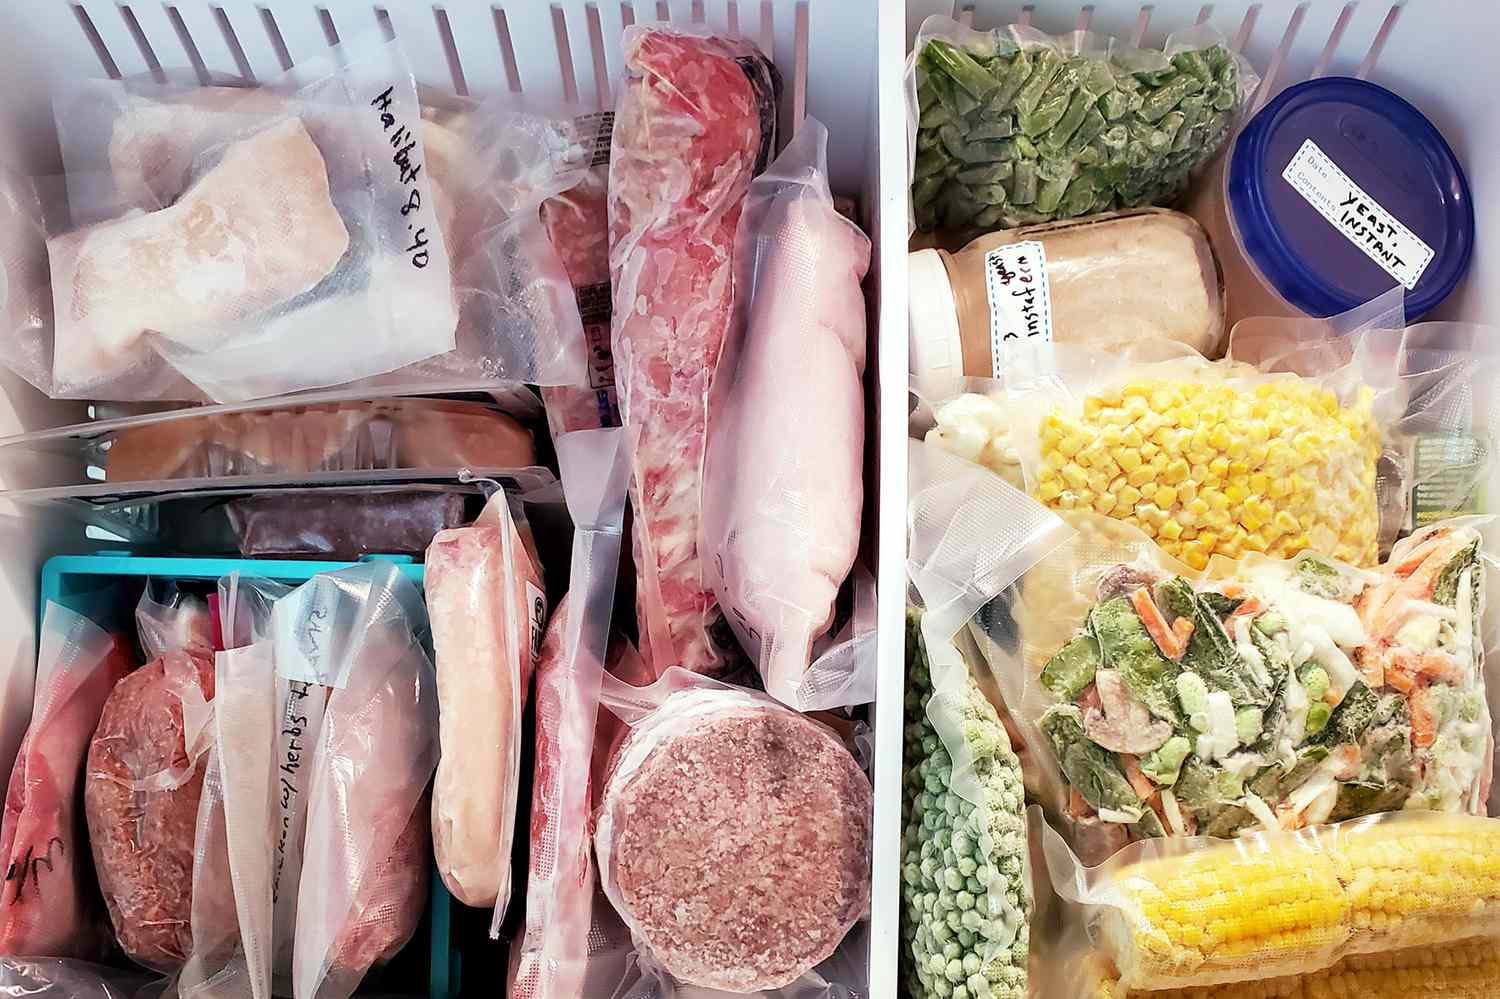 How To Organize A Chest Freezer